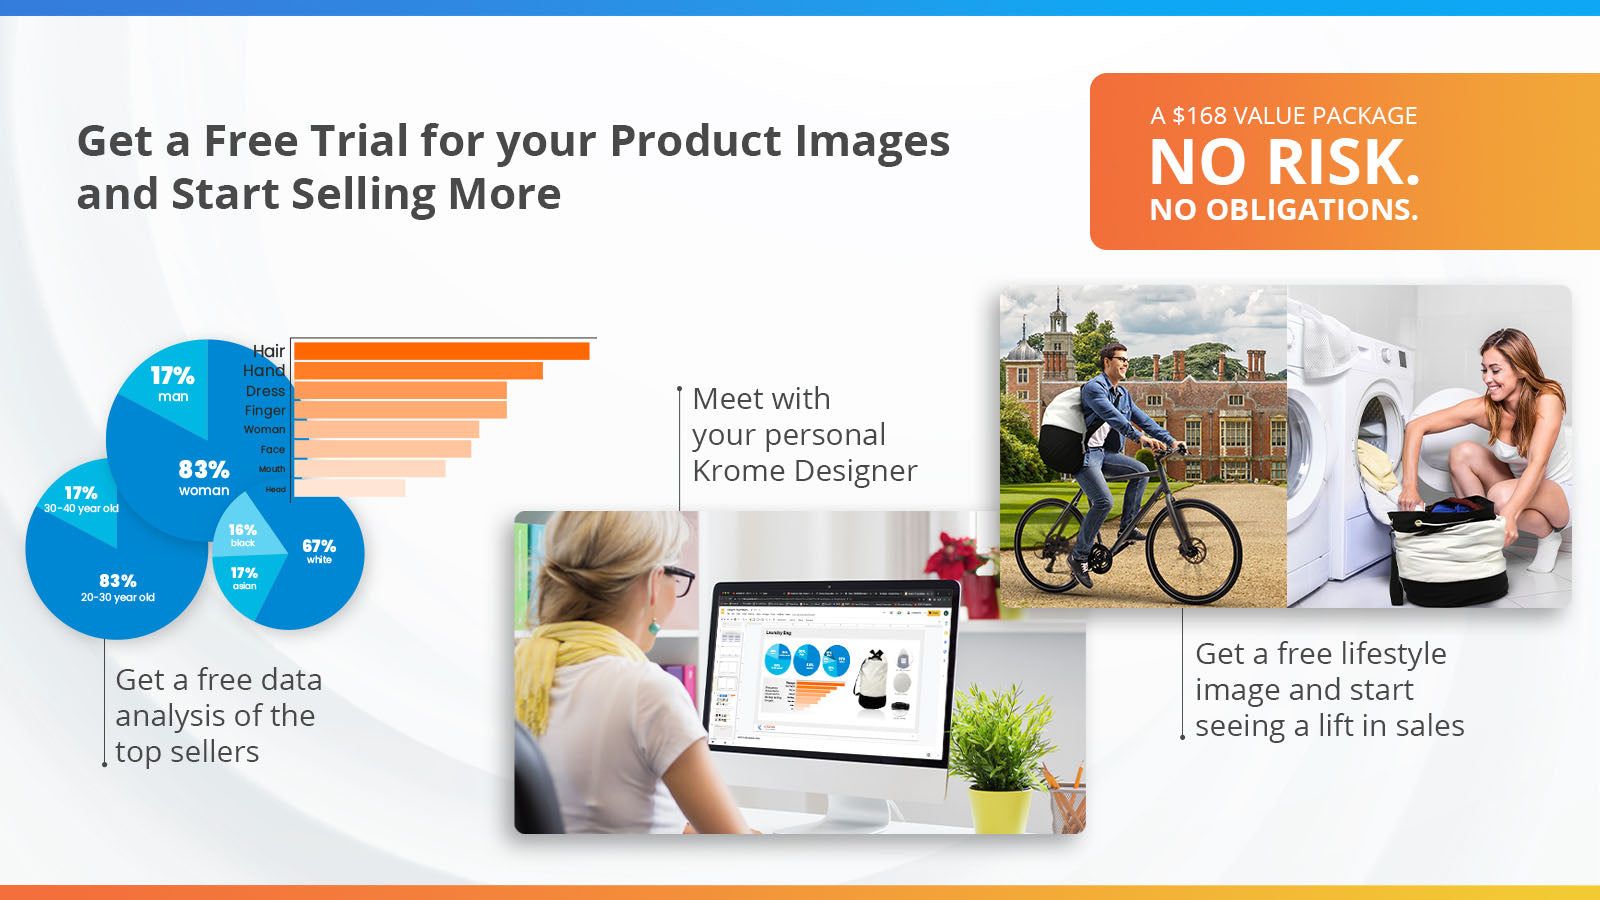 Get a Free Trial for your Product Images and Start Selling More